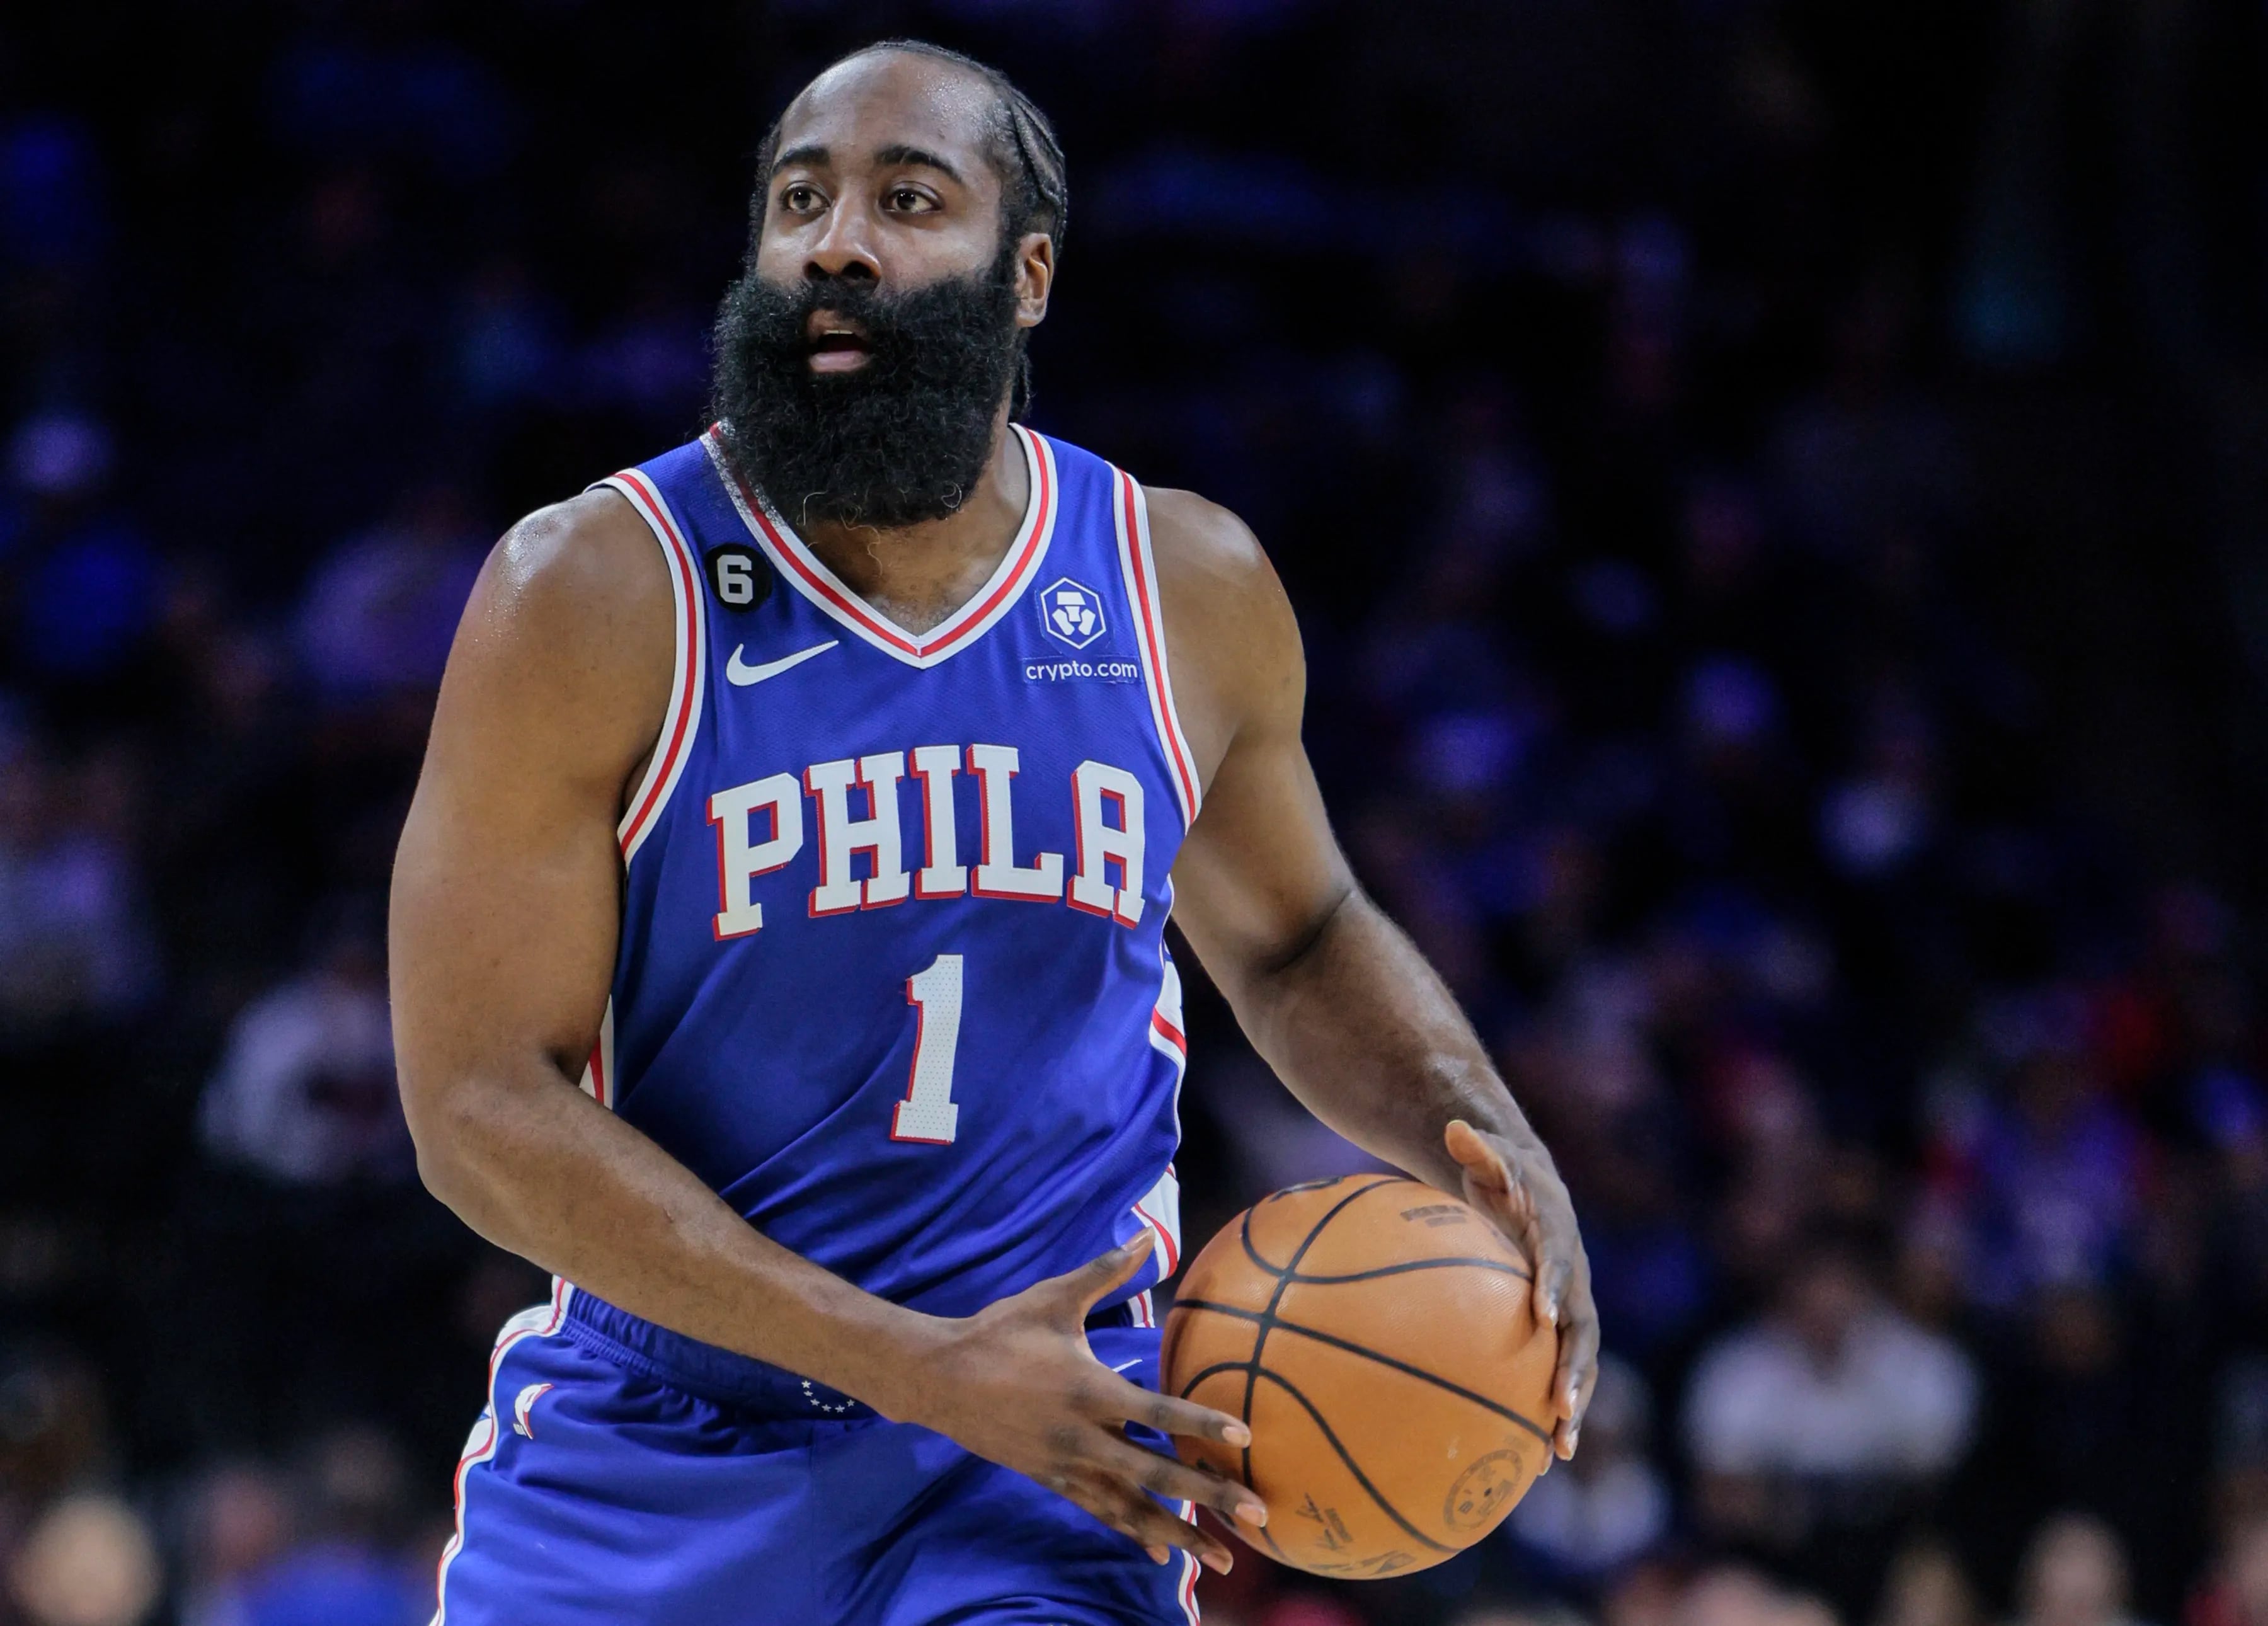 Sixers news and rumors: James Harden opts in, so is a trade next?